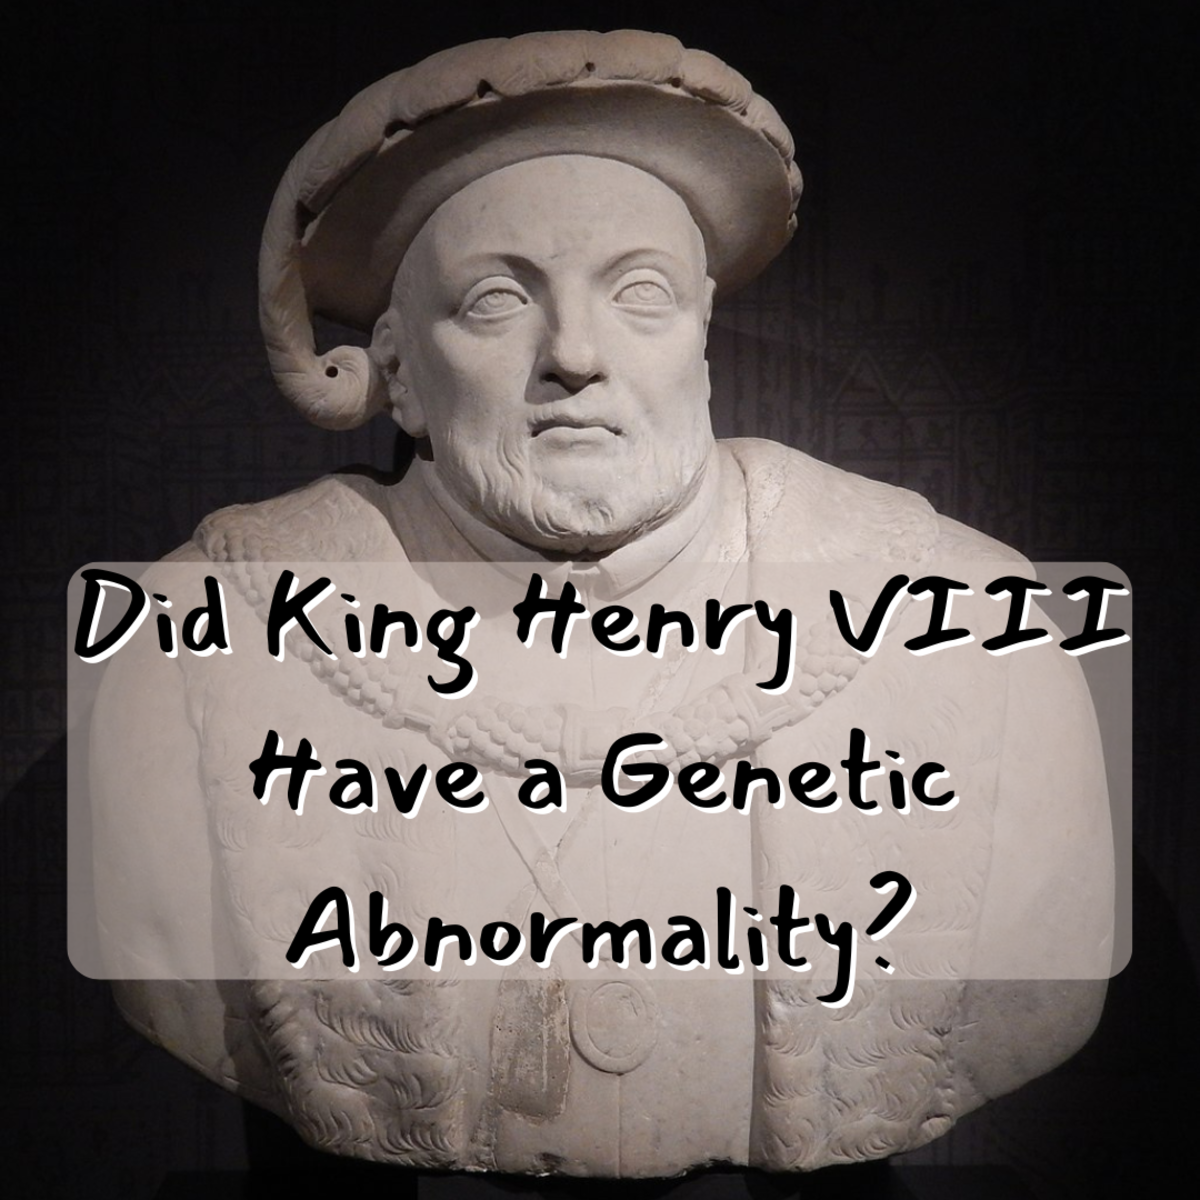 Did King Henry VIII Have a Genetic Abnormality?